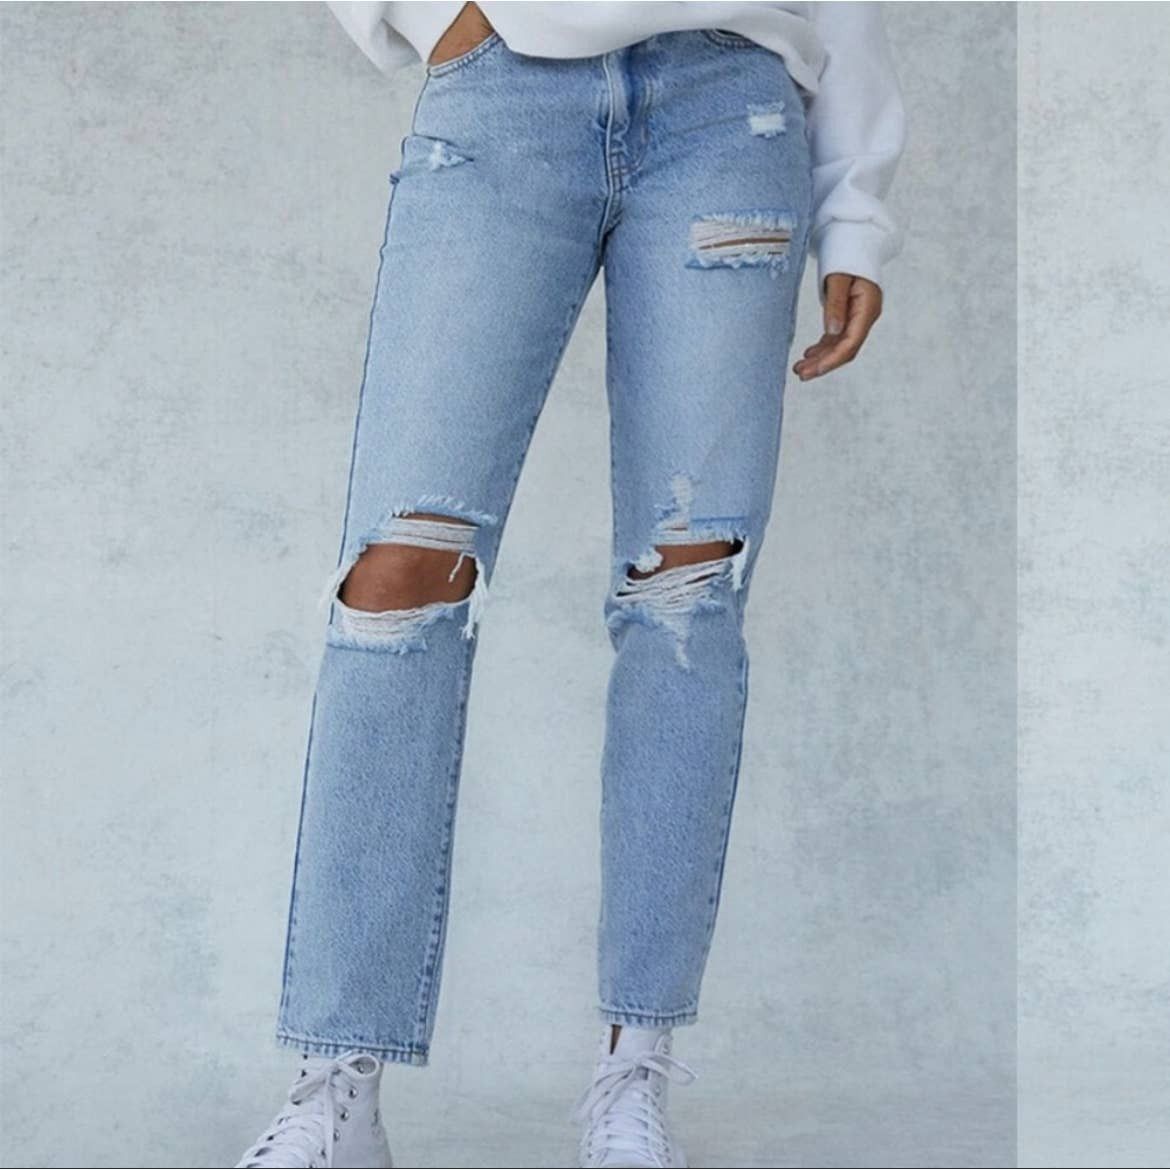 Pacsun Pacsun light blue distressed mom Jeans 22 Size 22" - 9 Preview